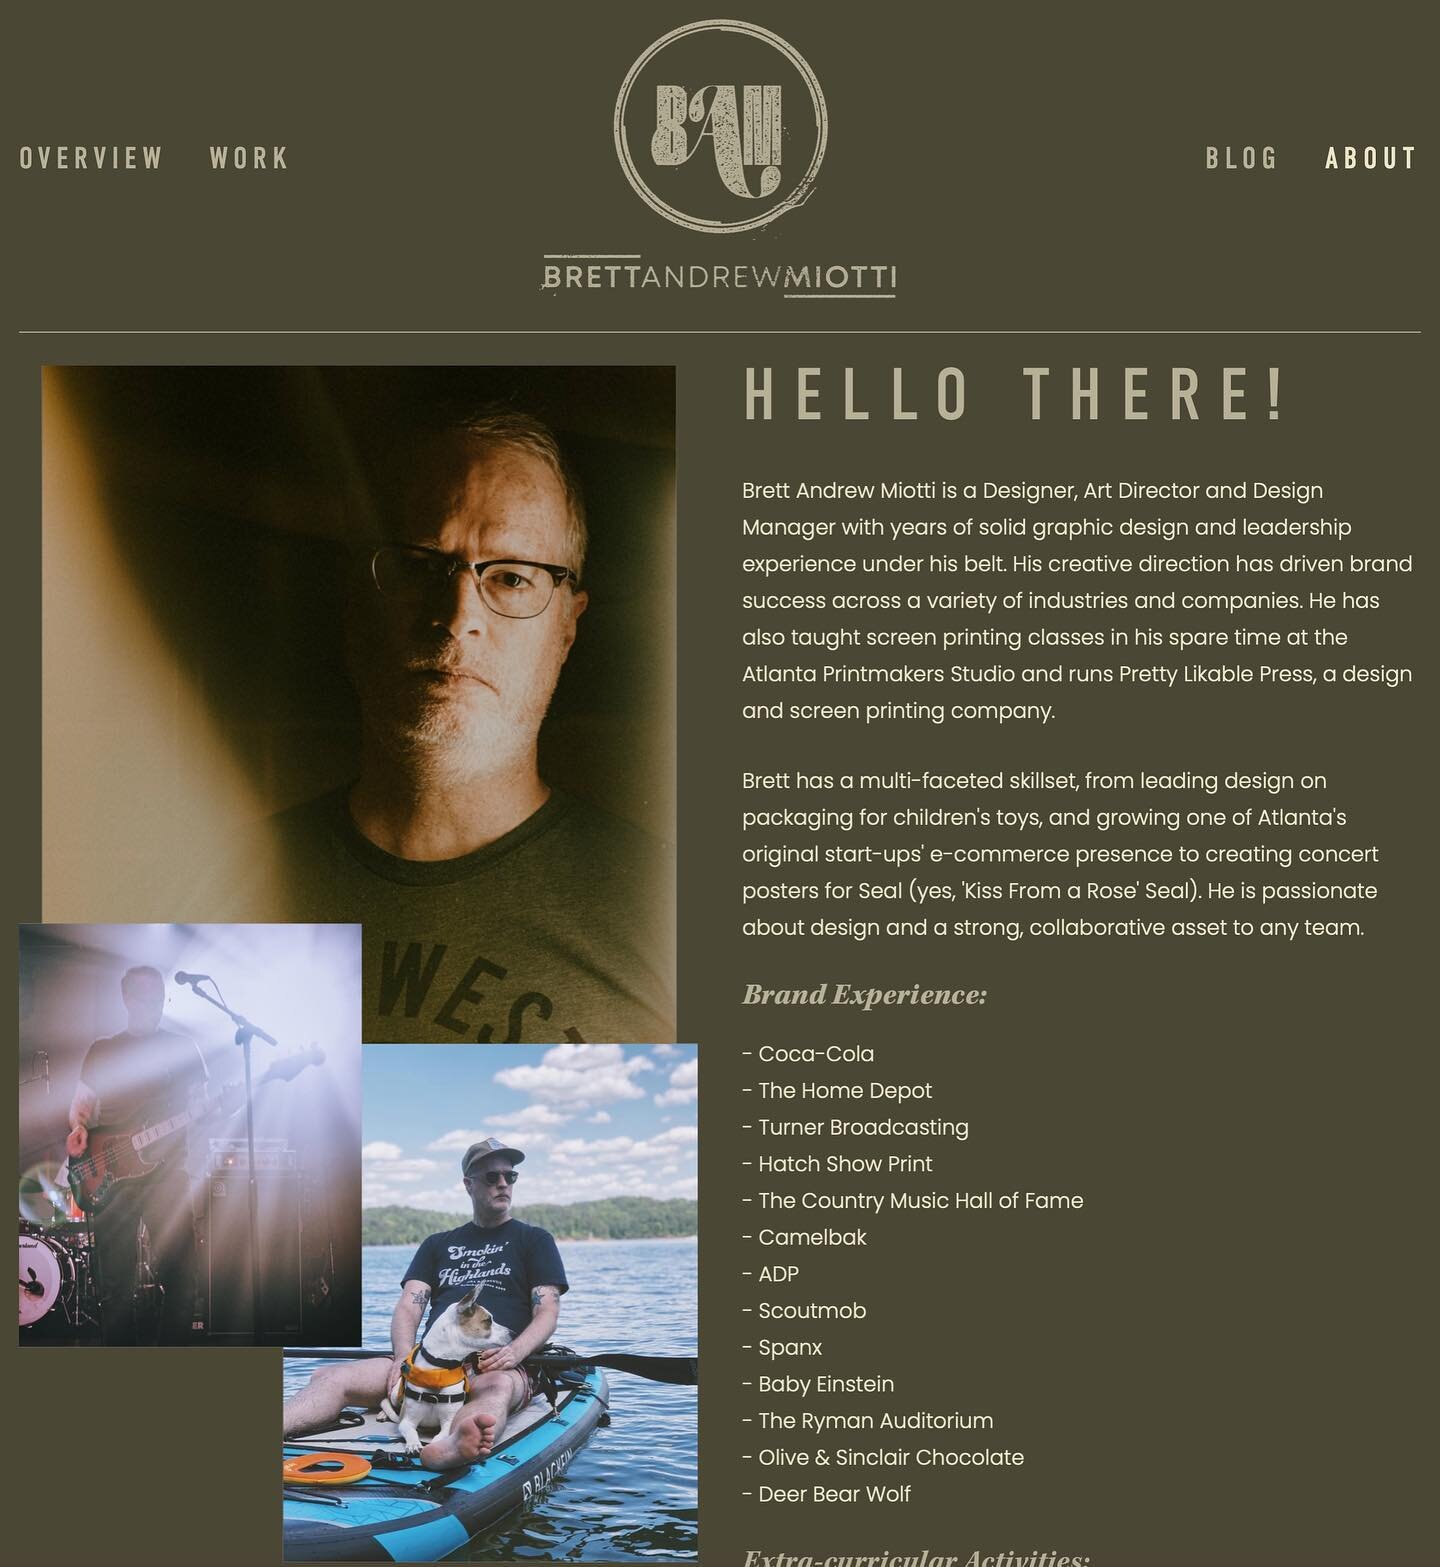 Phew! &lsquo;Been working non-stop lately to overhaul brettandrewmiotti.com. I think it&rsquo;s finally at a place where I can share. Tons of design work to peep and I&rsquo;m still going, adding even more. &lsquo;Even updated my personal branding wh